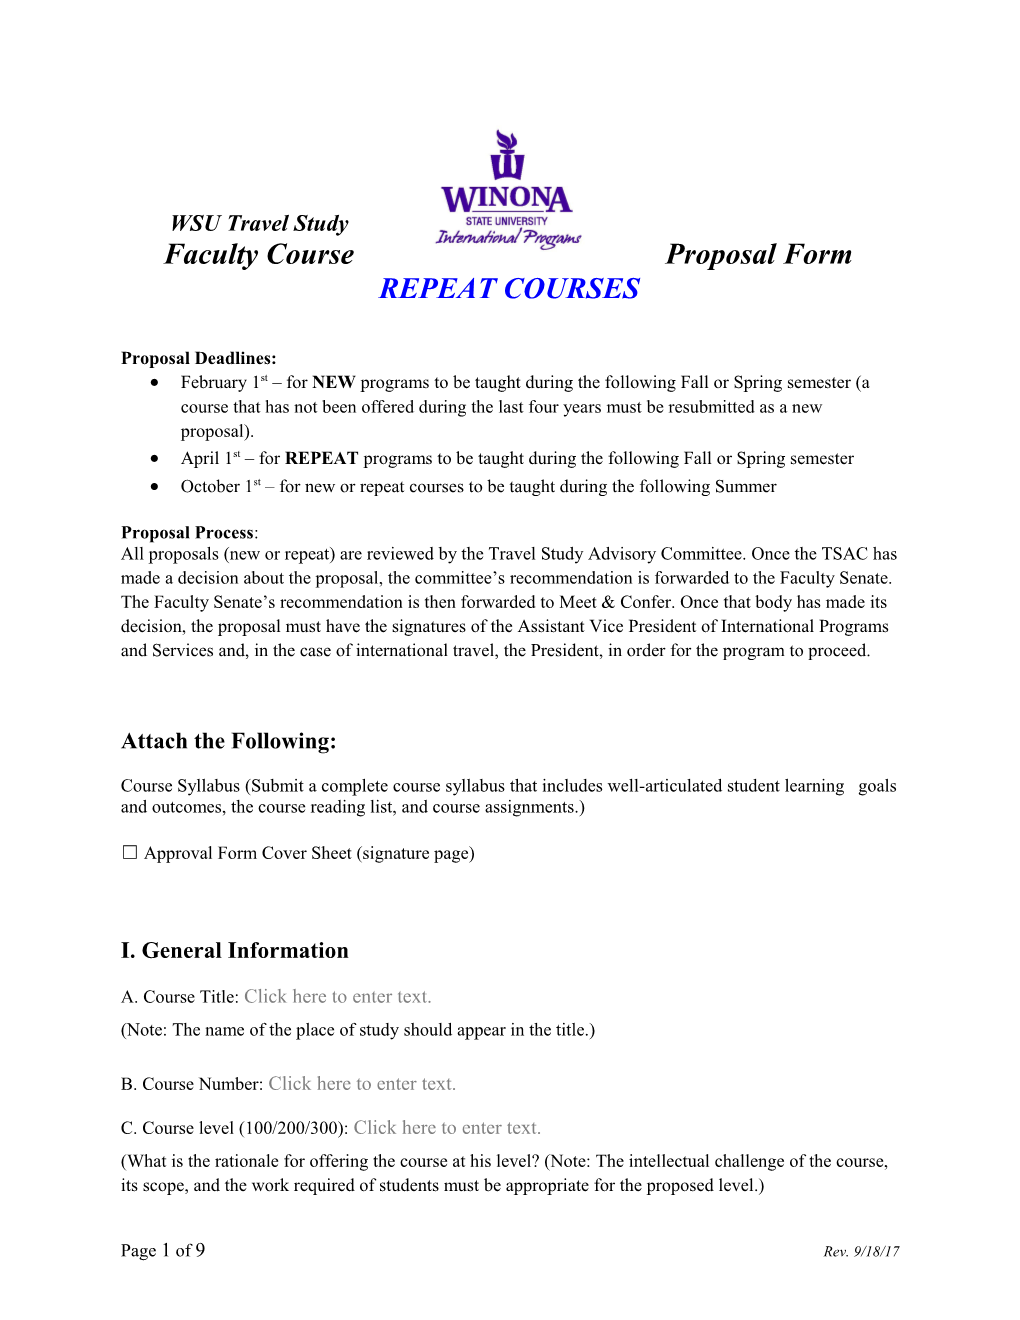 Faculty Course Proposal Form